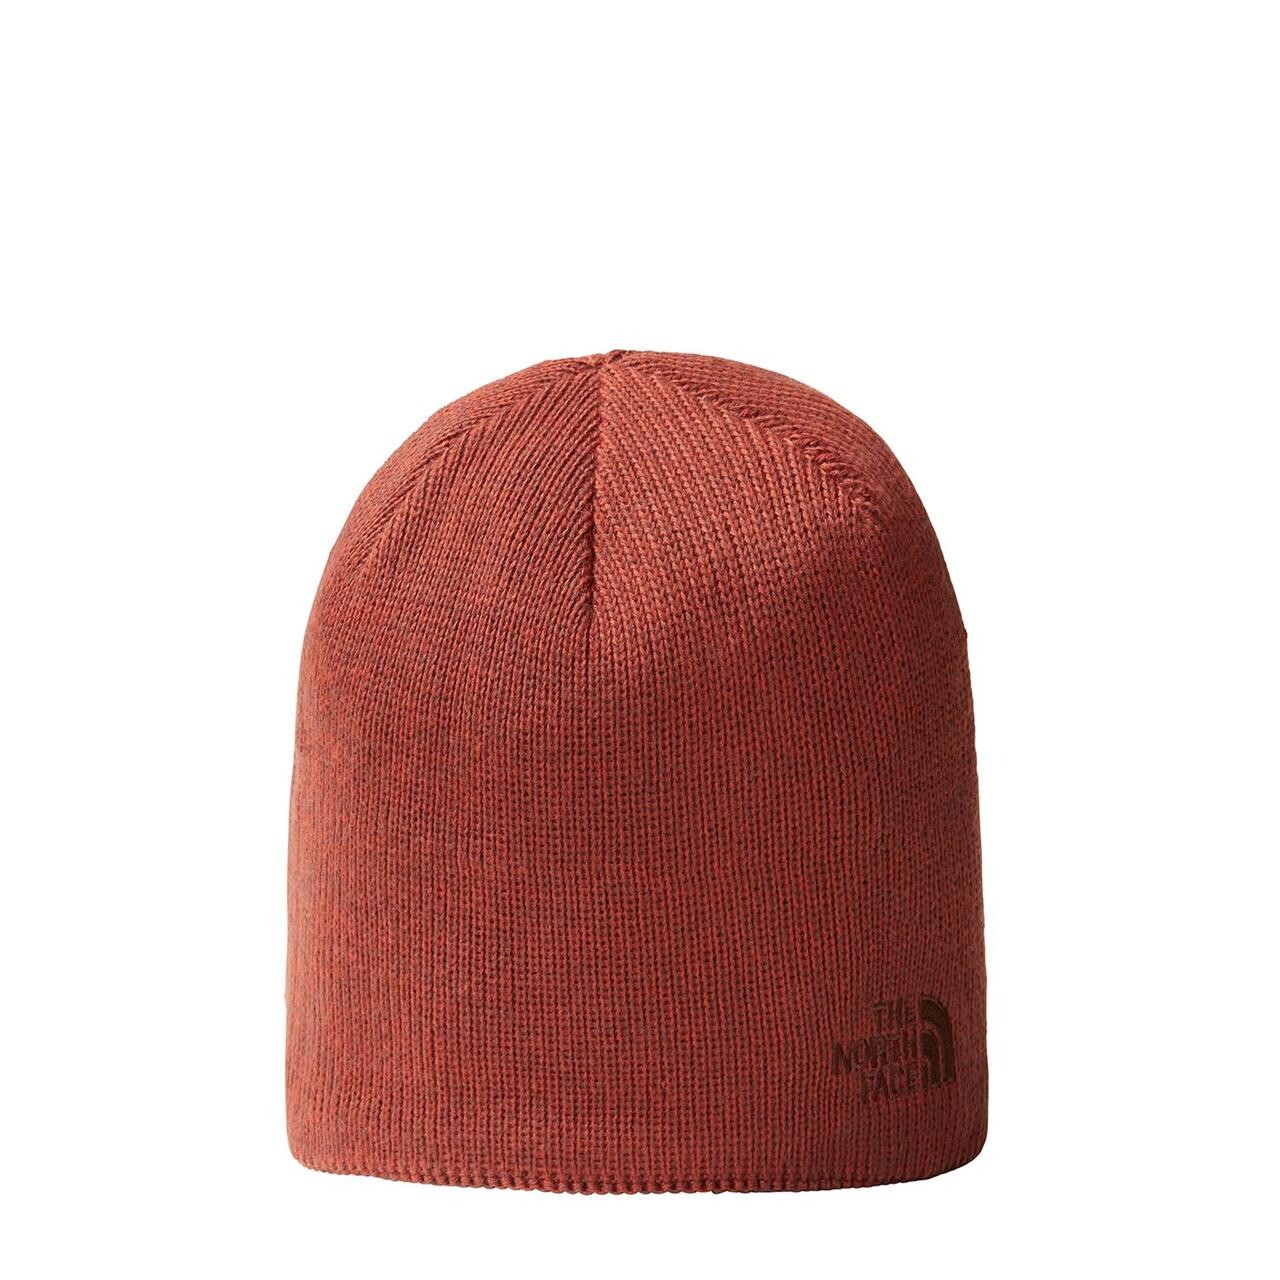 5: The North Face Bones Recycled Beanie (Brun (BRANDY BROWN HEATHER) One size)